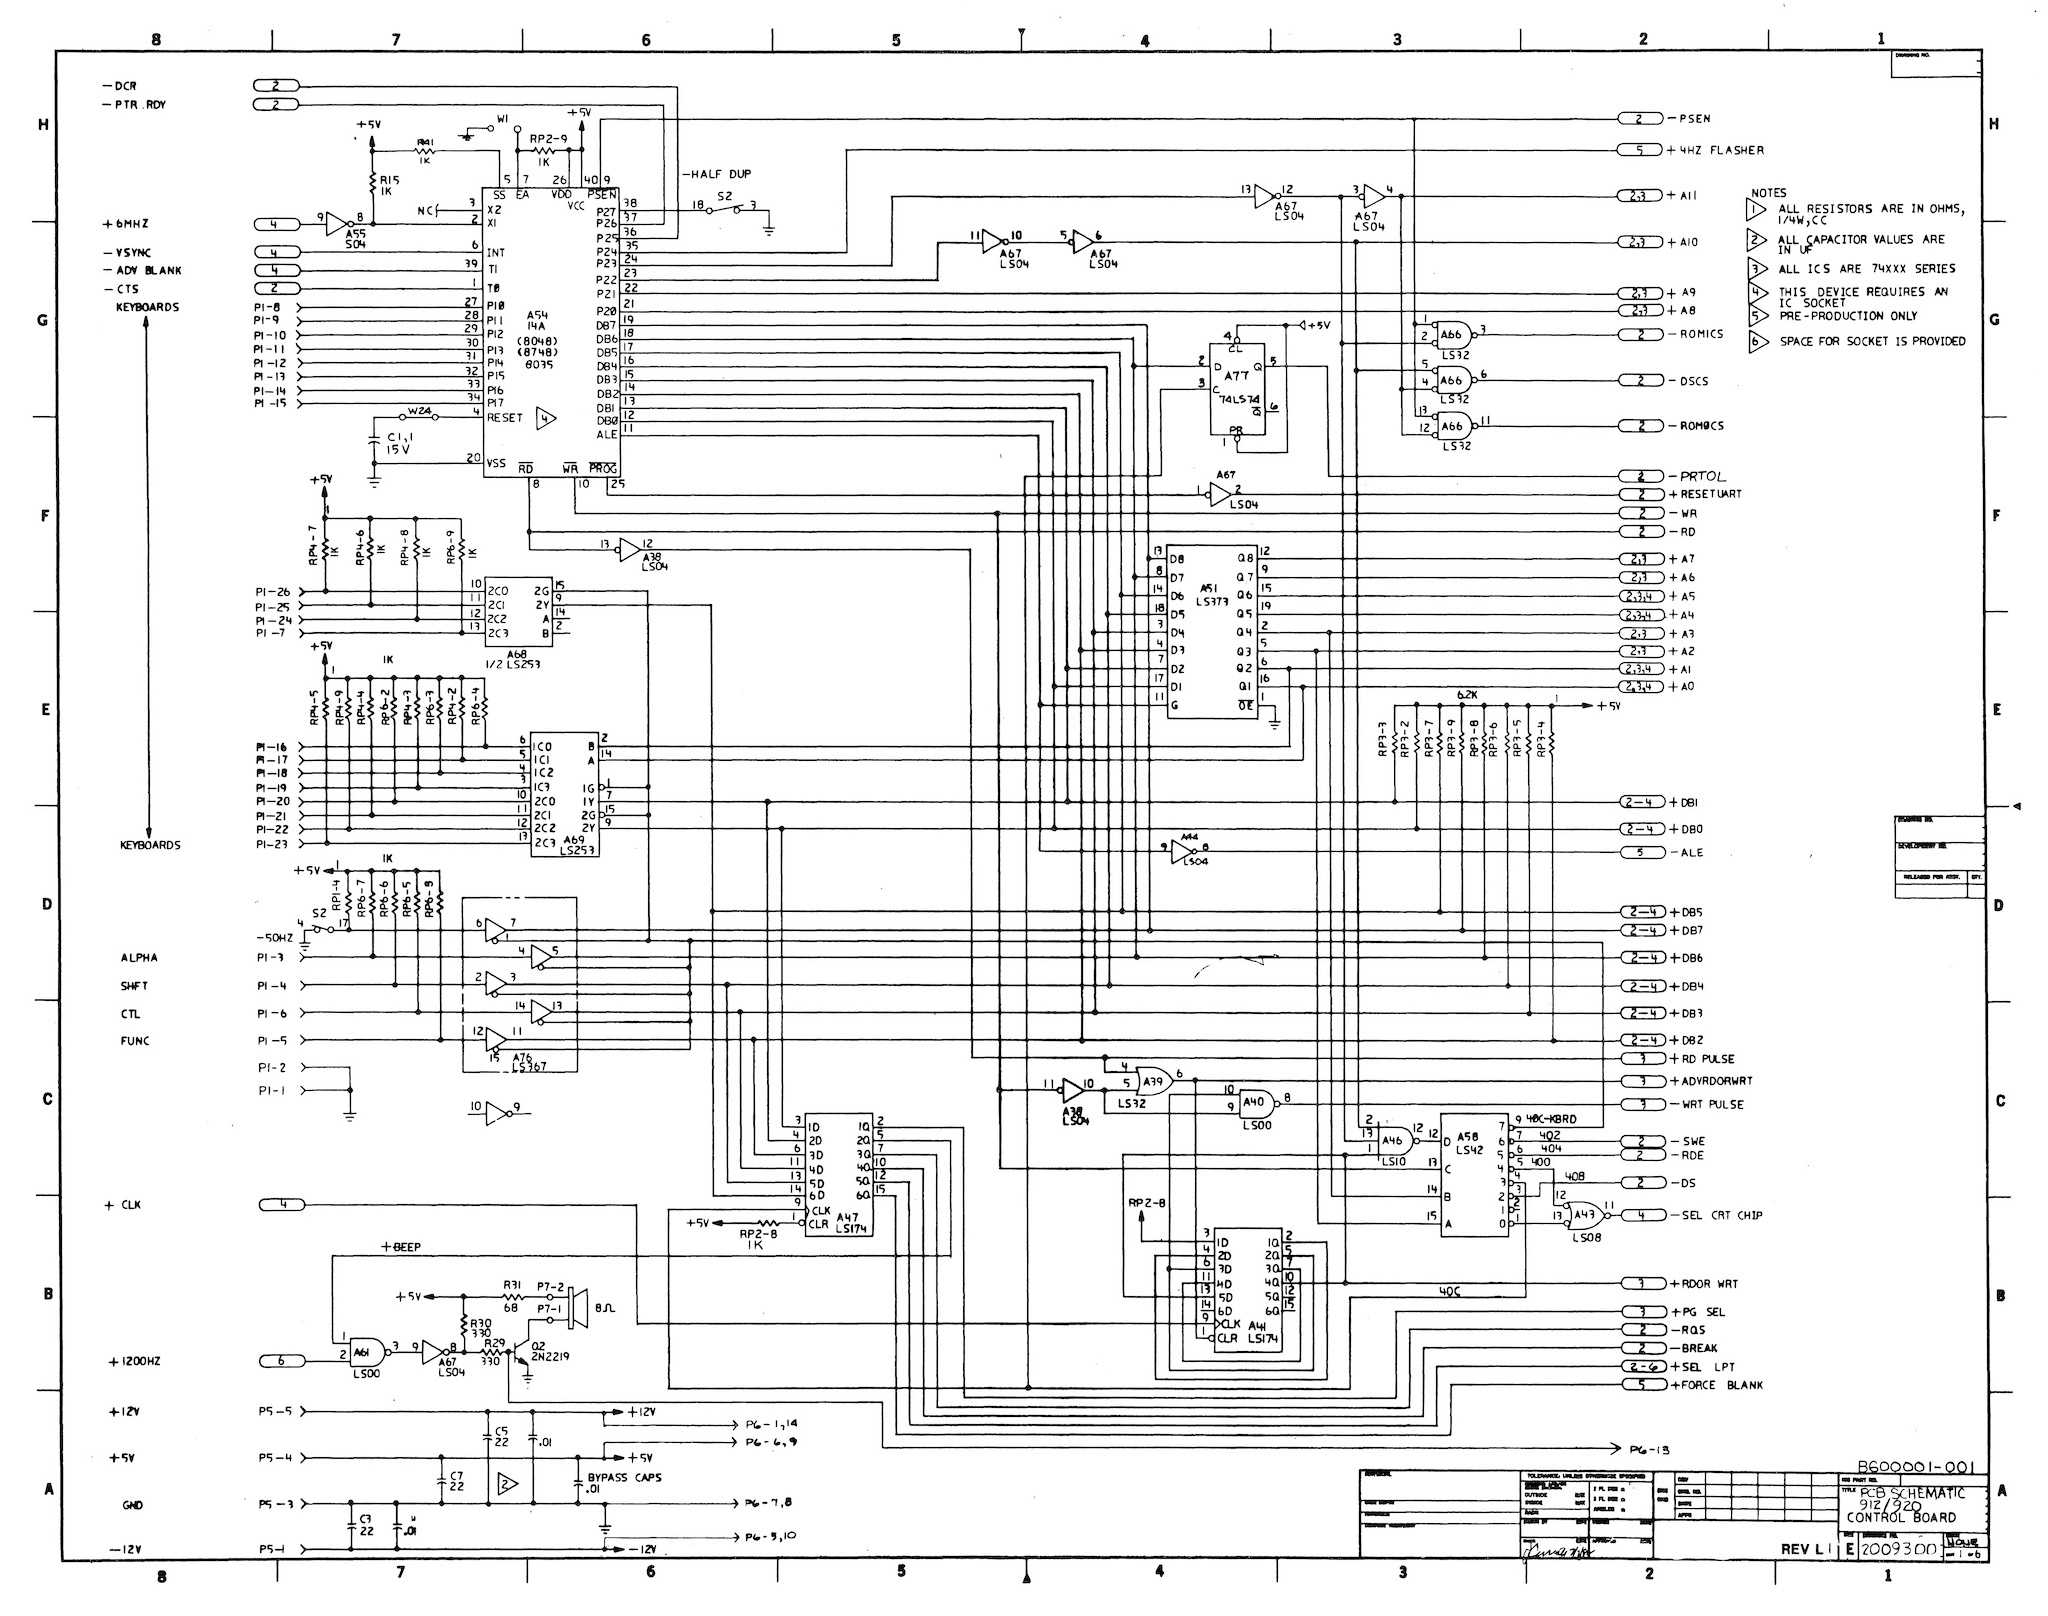 First page of the schematics